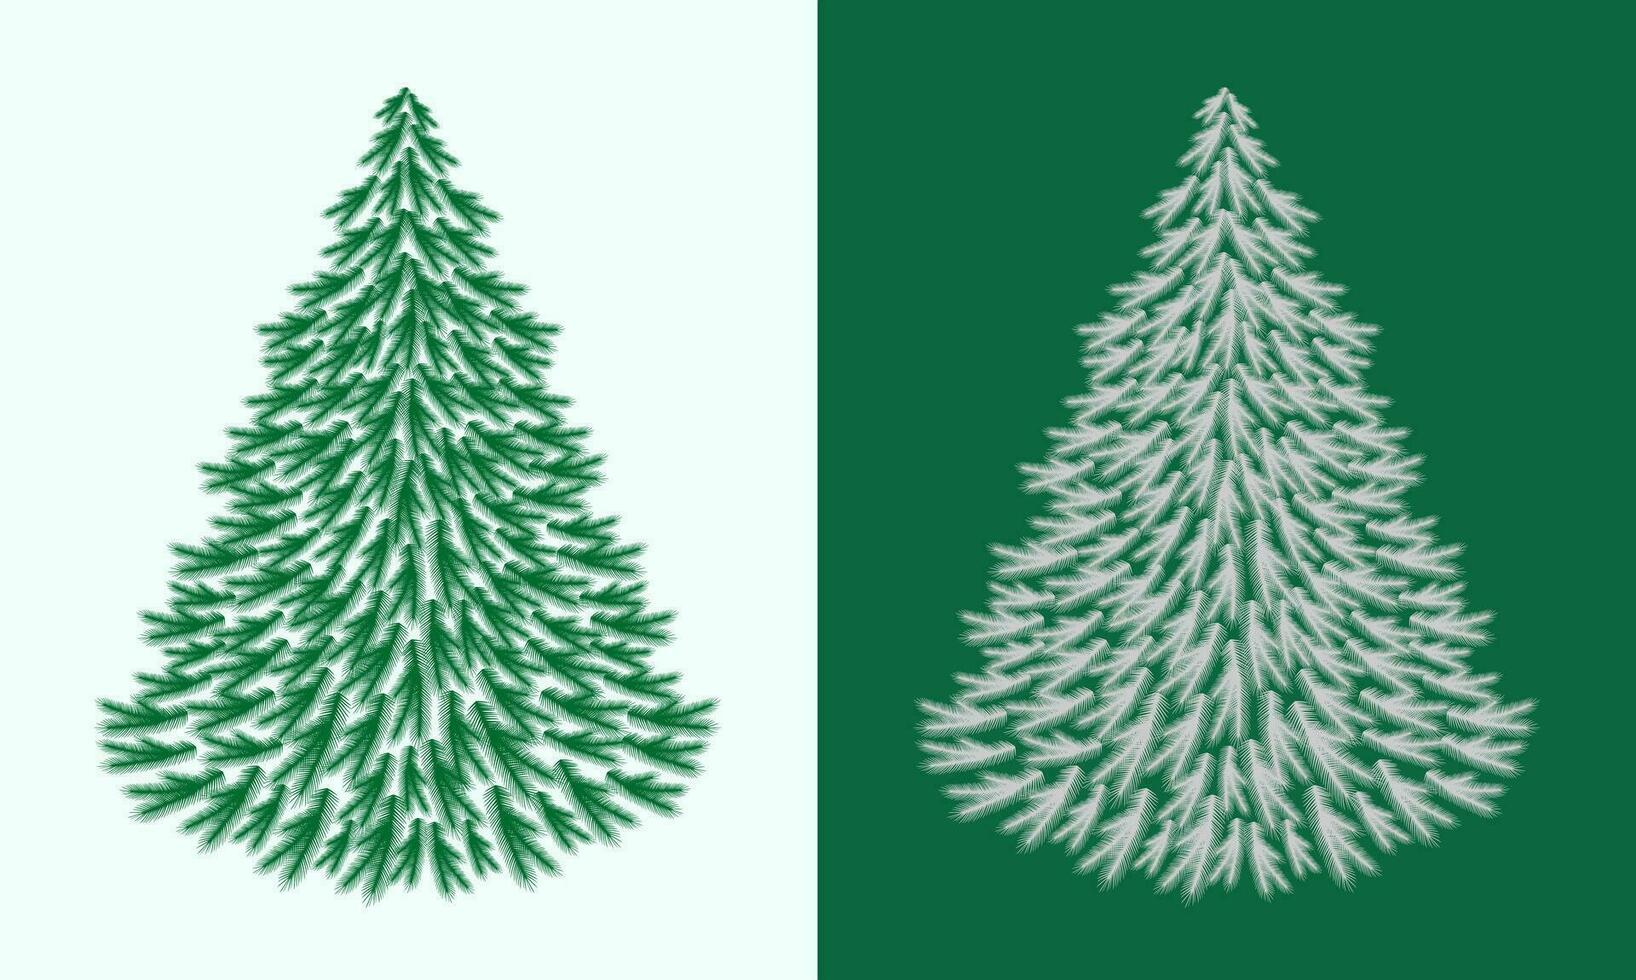 Christmas tree. New year season. Holiday fir on the background. Winter nature. Vector illustration.